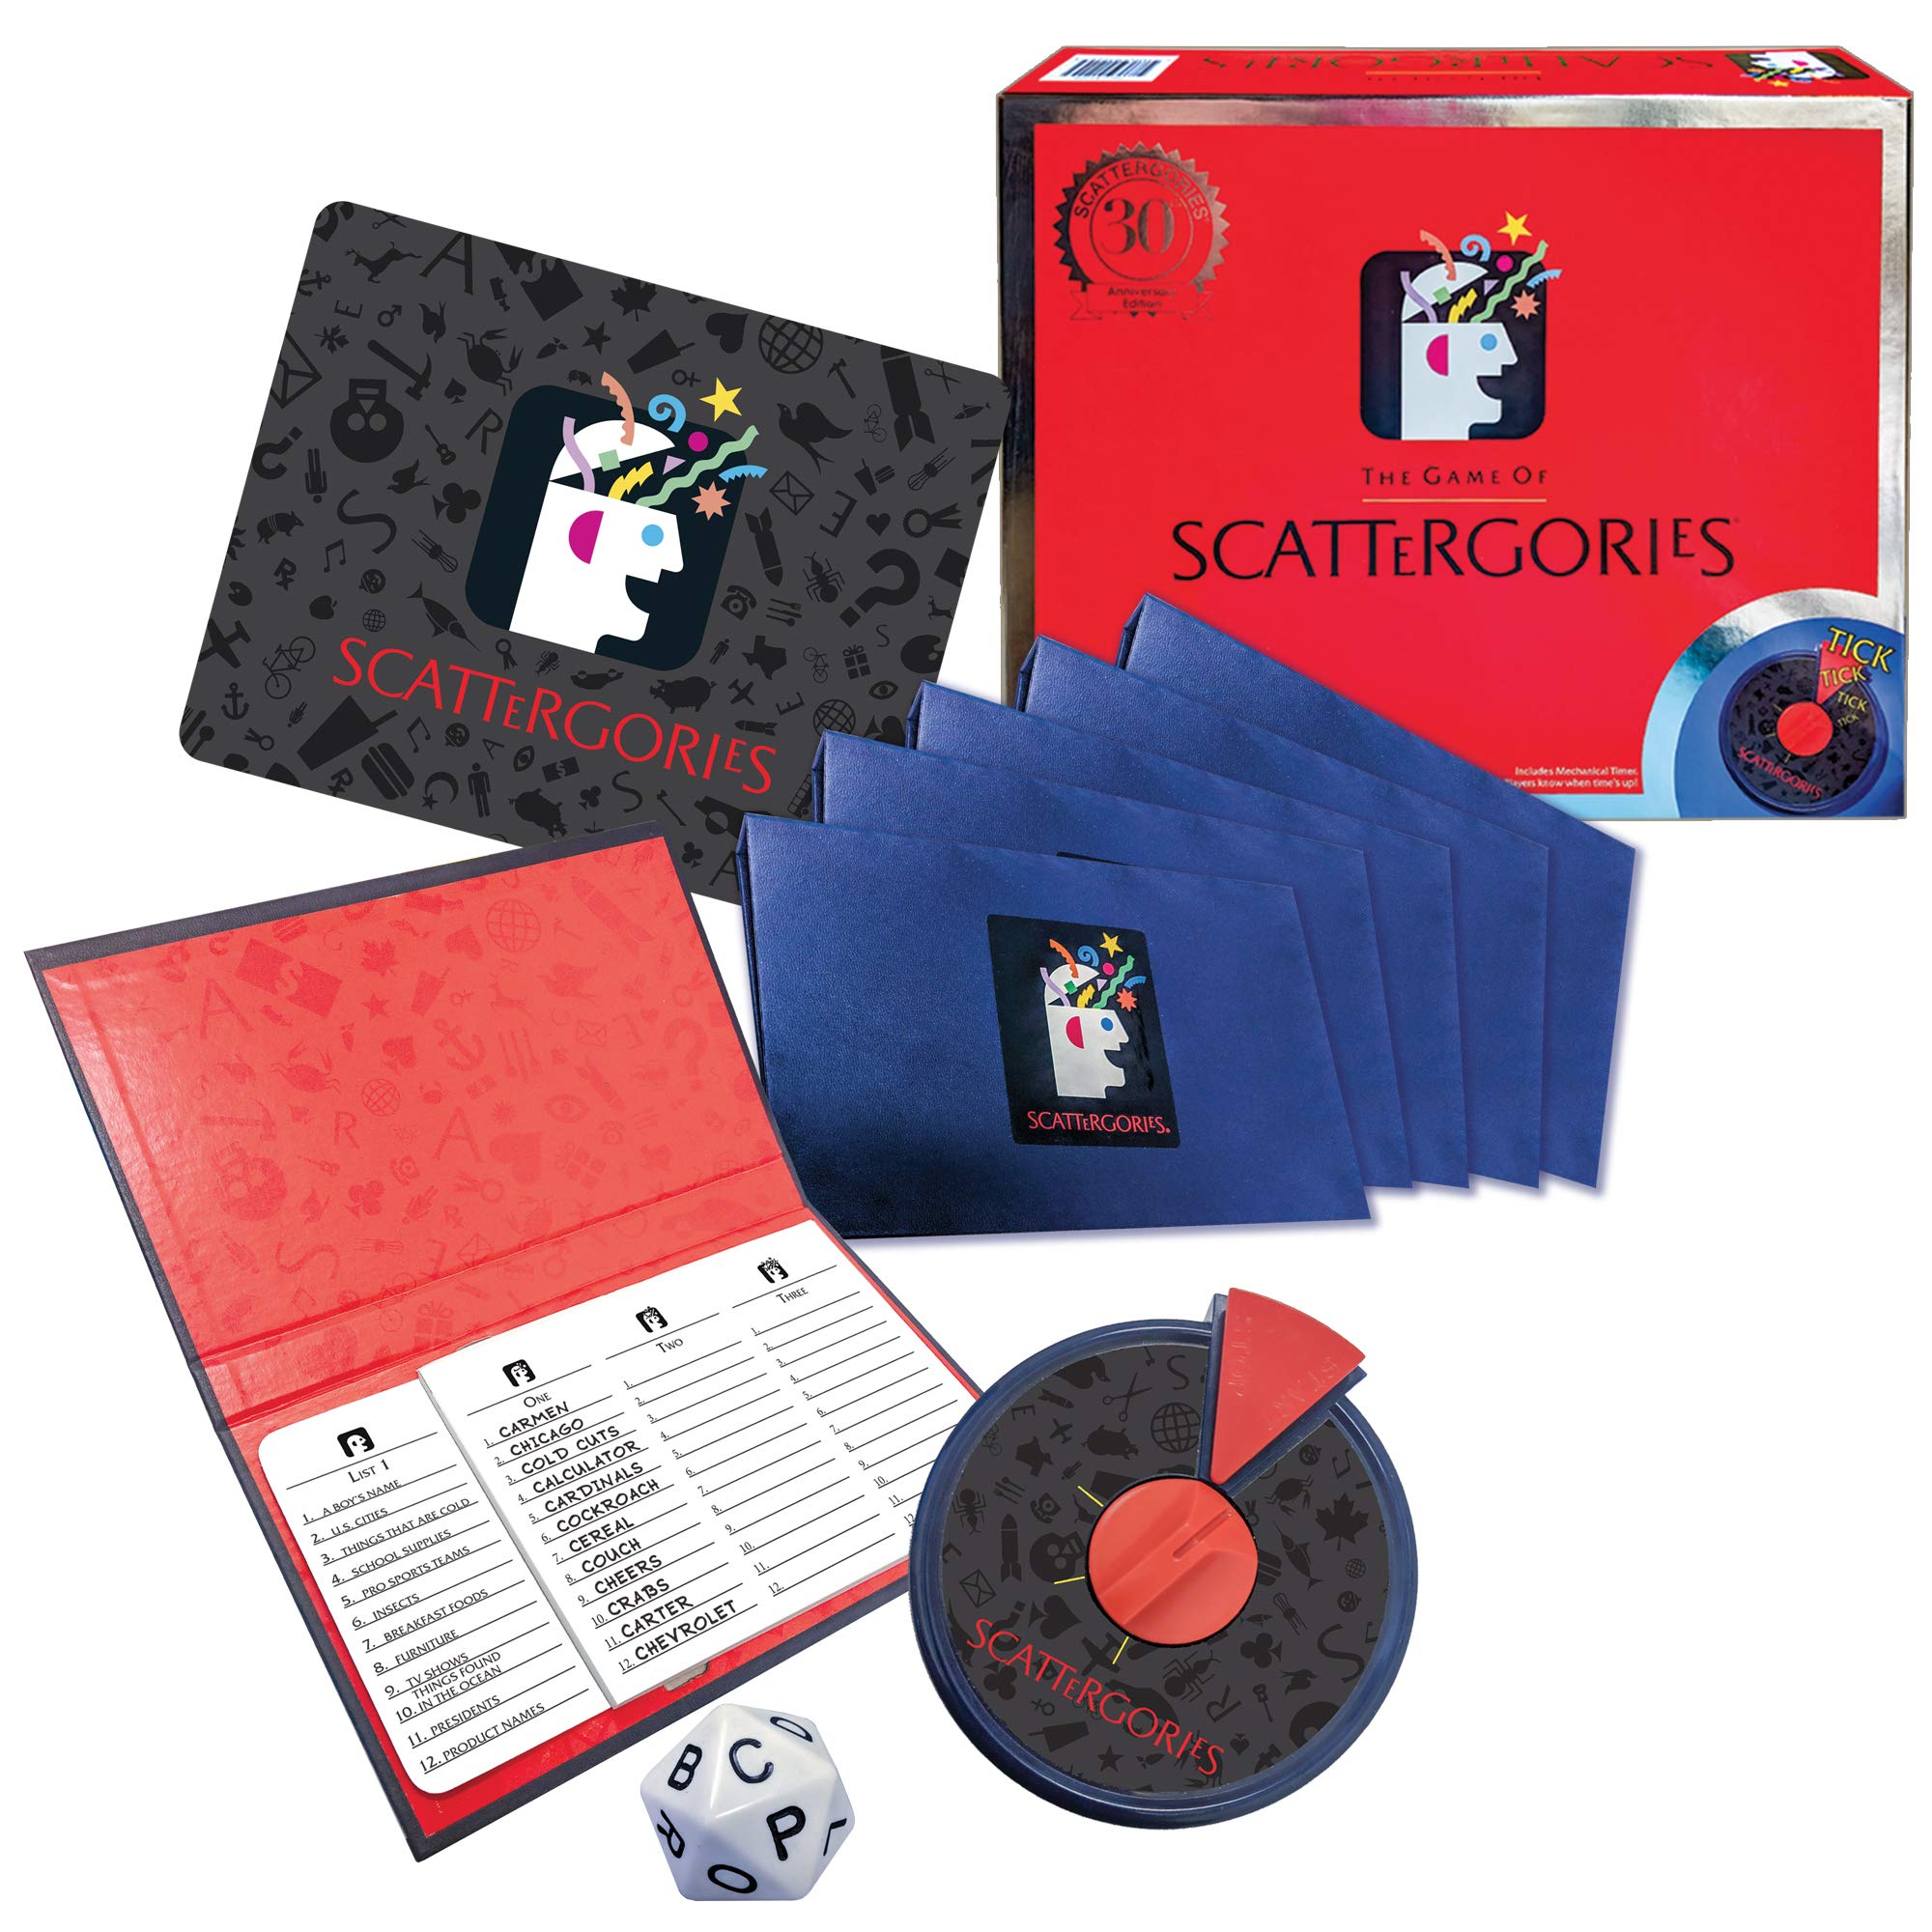 Winning Moves Scattergories 30th Anniversary Edition, Brown, for ages 12 and up